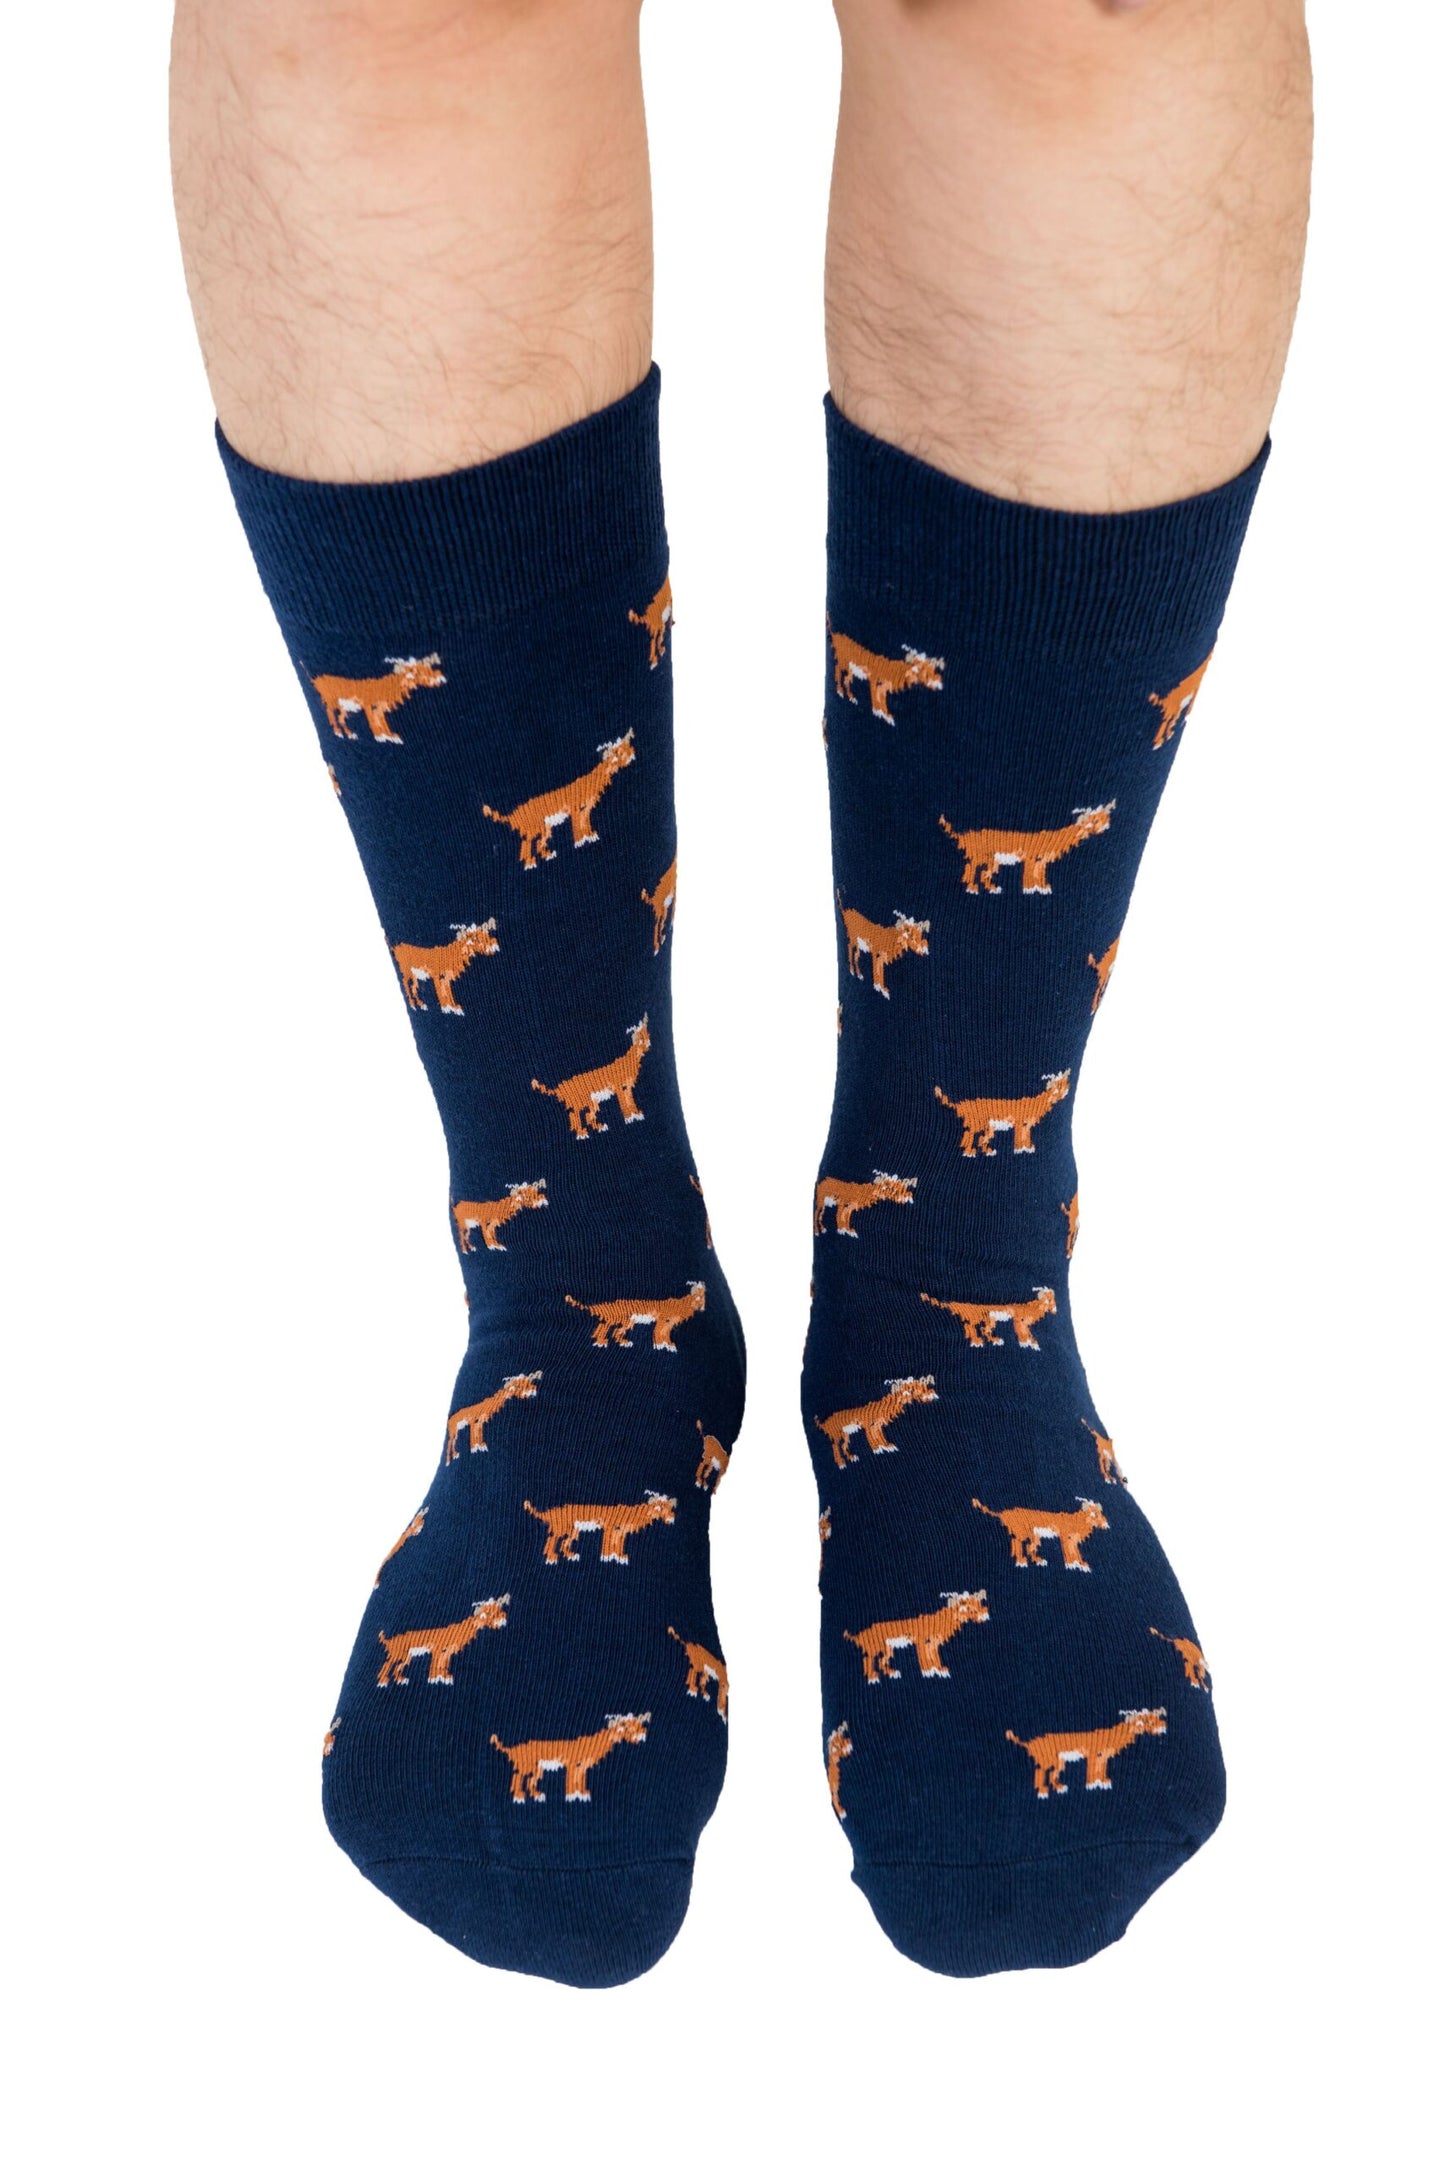 A pair of legs with Goat Socks.